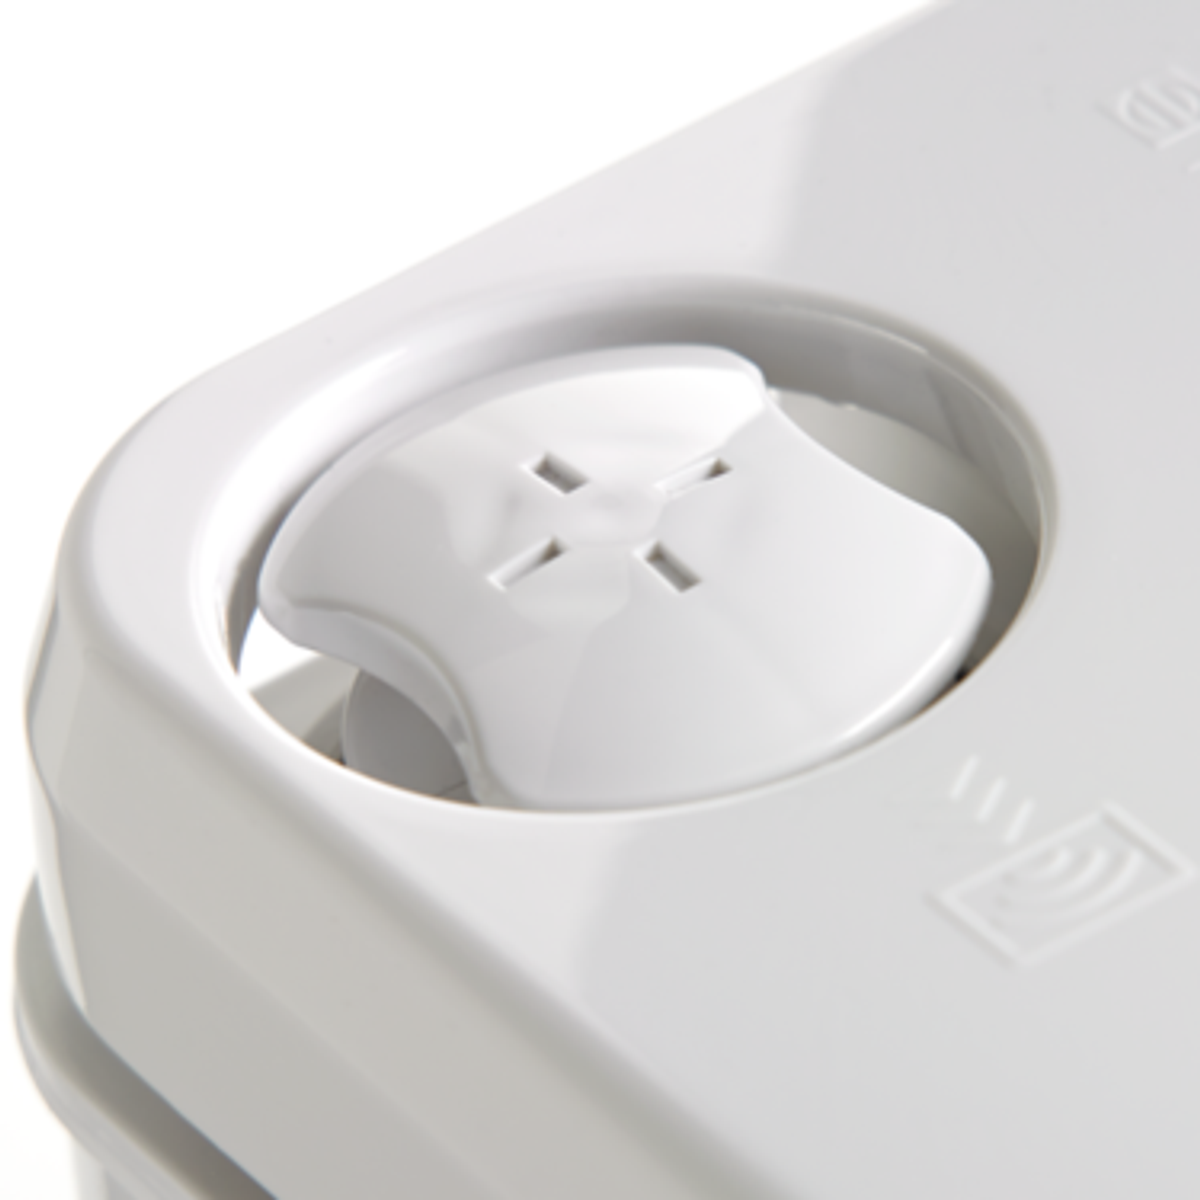 Dometic 976 Toilet White and Grey 